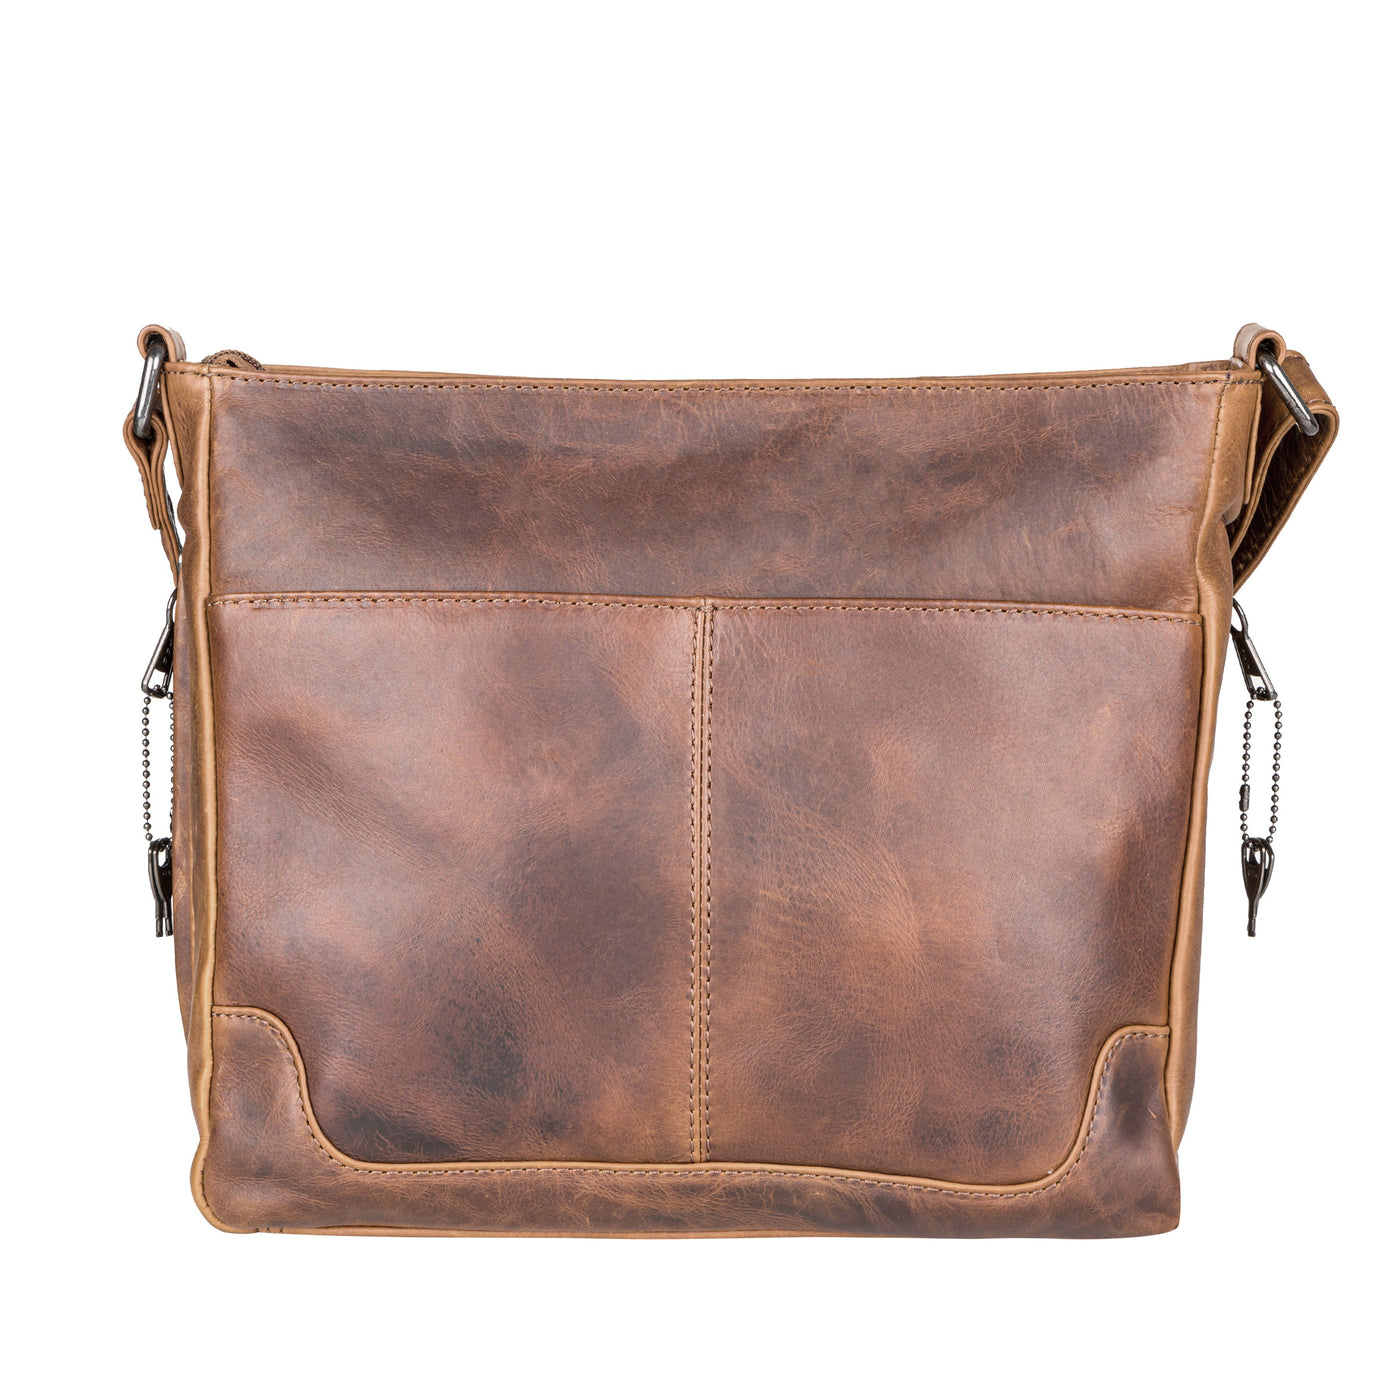 Concealed Carry Lydia Leather Crossbody - YKK Locking Zippers and Universal Holster - Soft Leather conceal and carry bag - Tactical womans purse for pistol - Concealed Carry Purse - most popular crossbody bag - crossbody handgun bag - crossbody bags for everyday use - Easy CCW - Fast Draw Bag - Secure Gun Bag